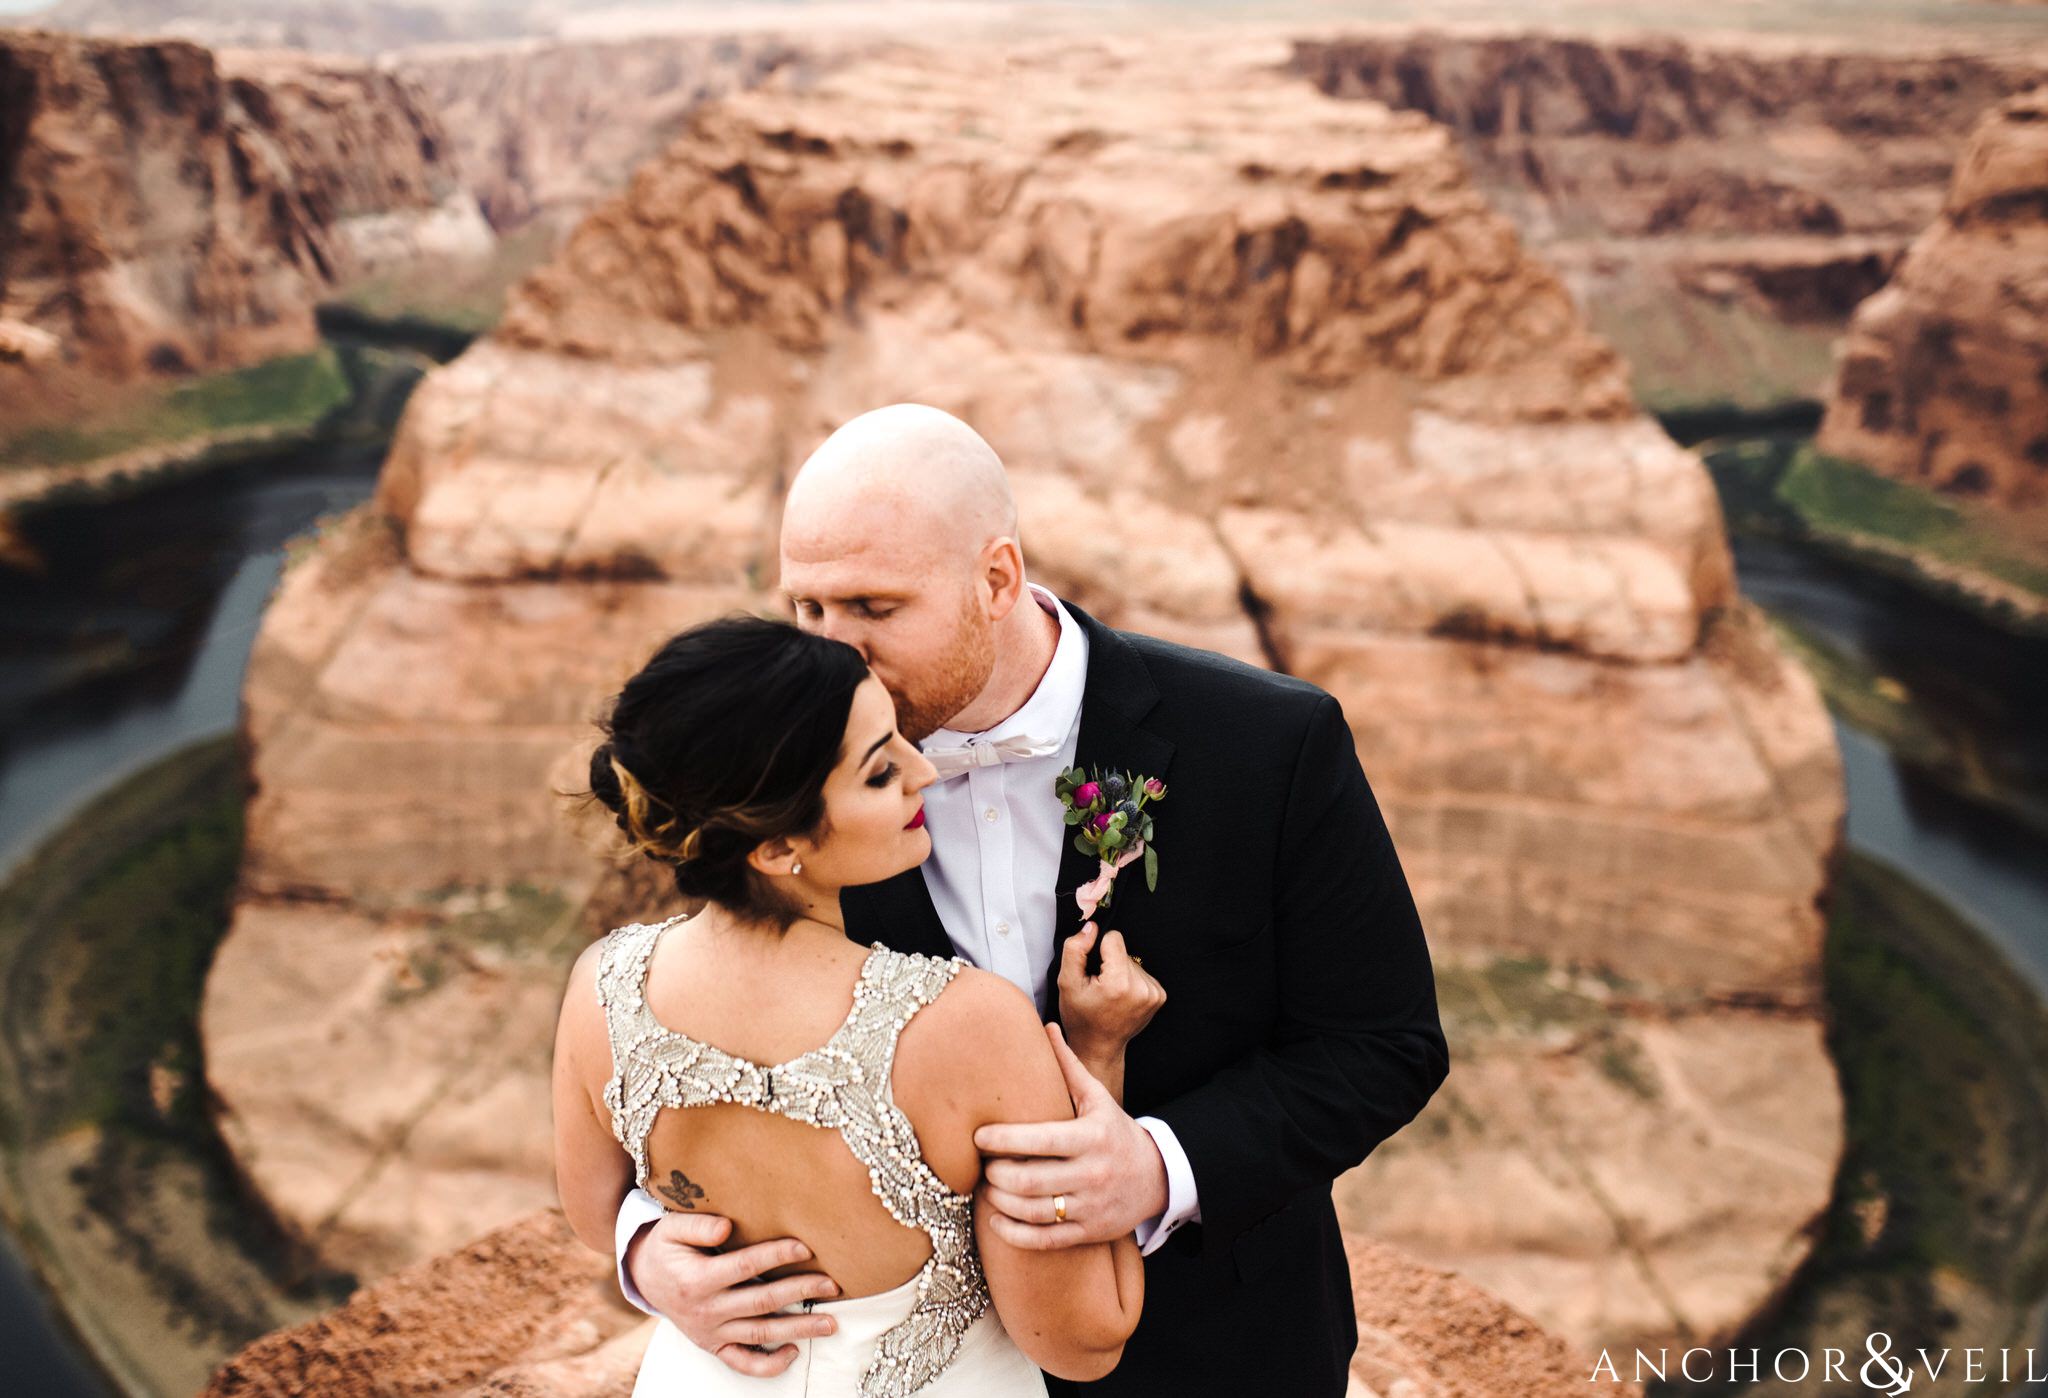 holding close and kissing during their Horseshoe Bend Elopement Wedding